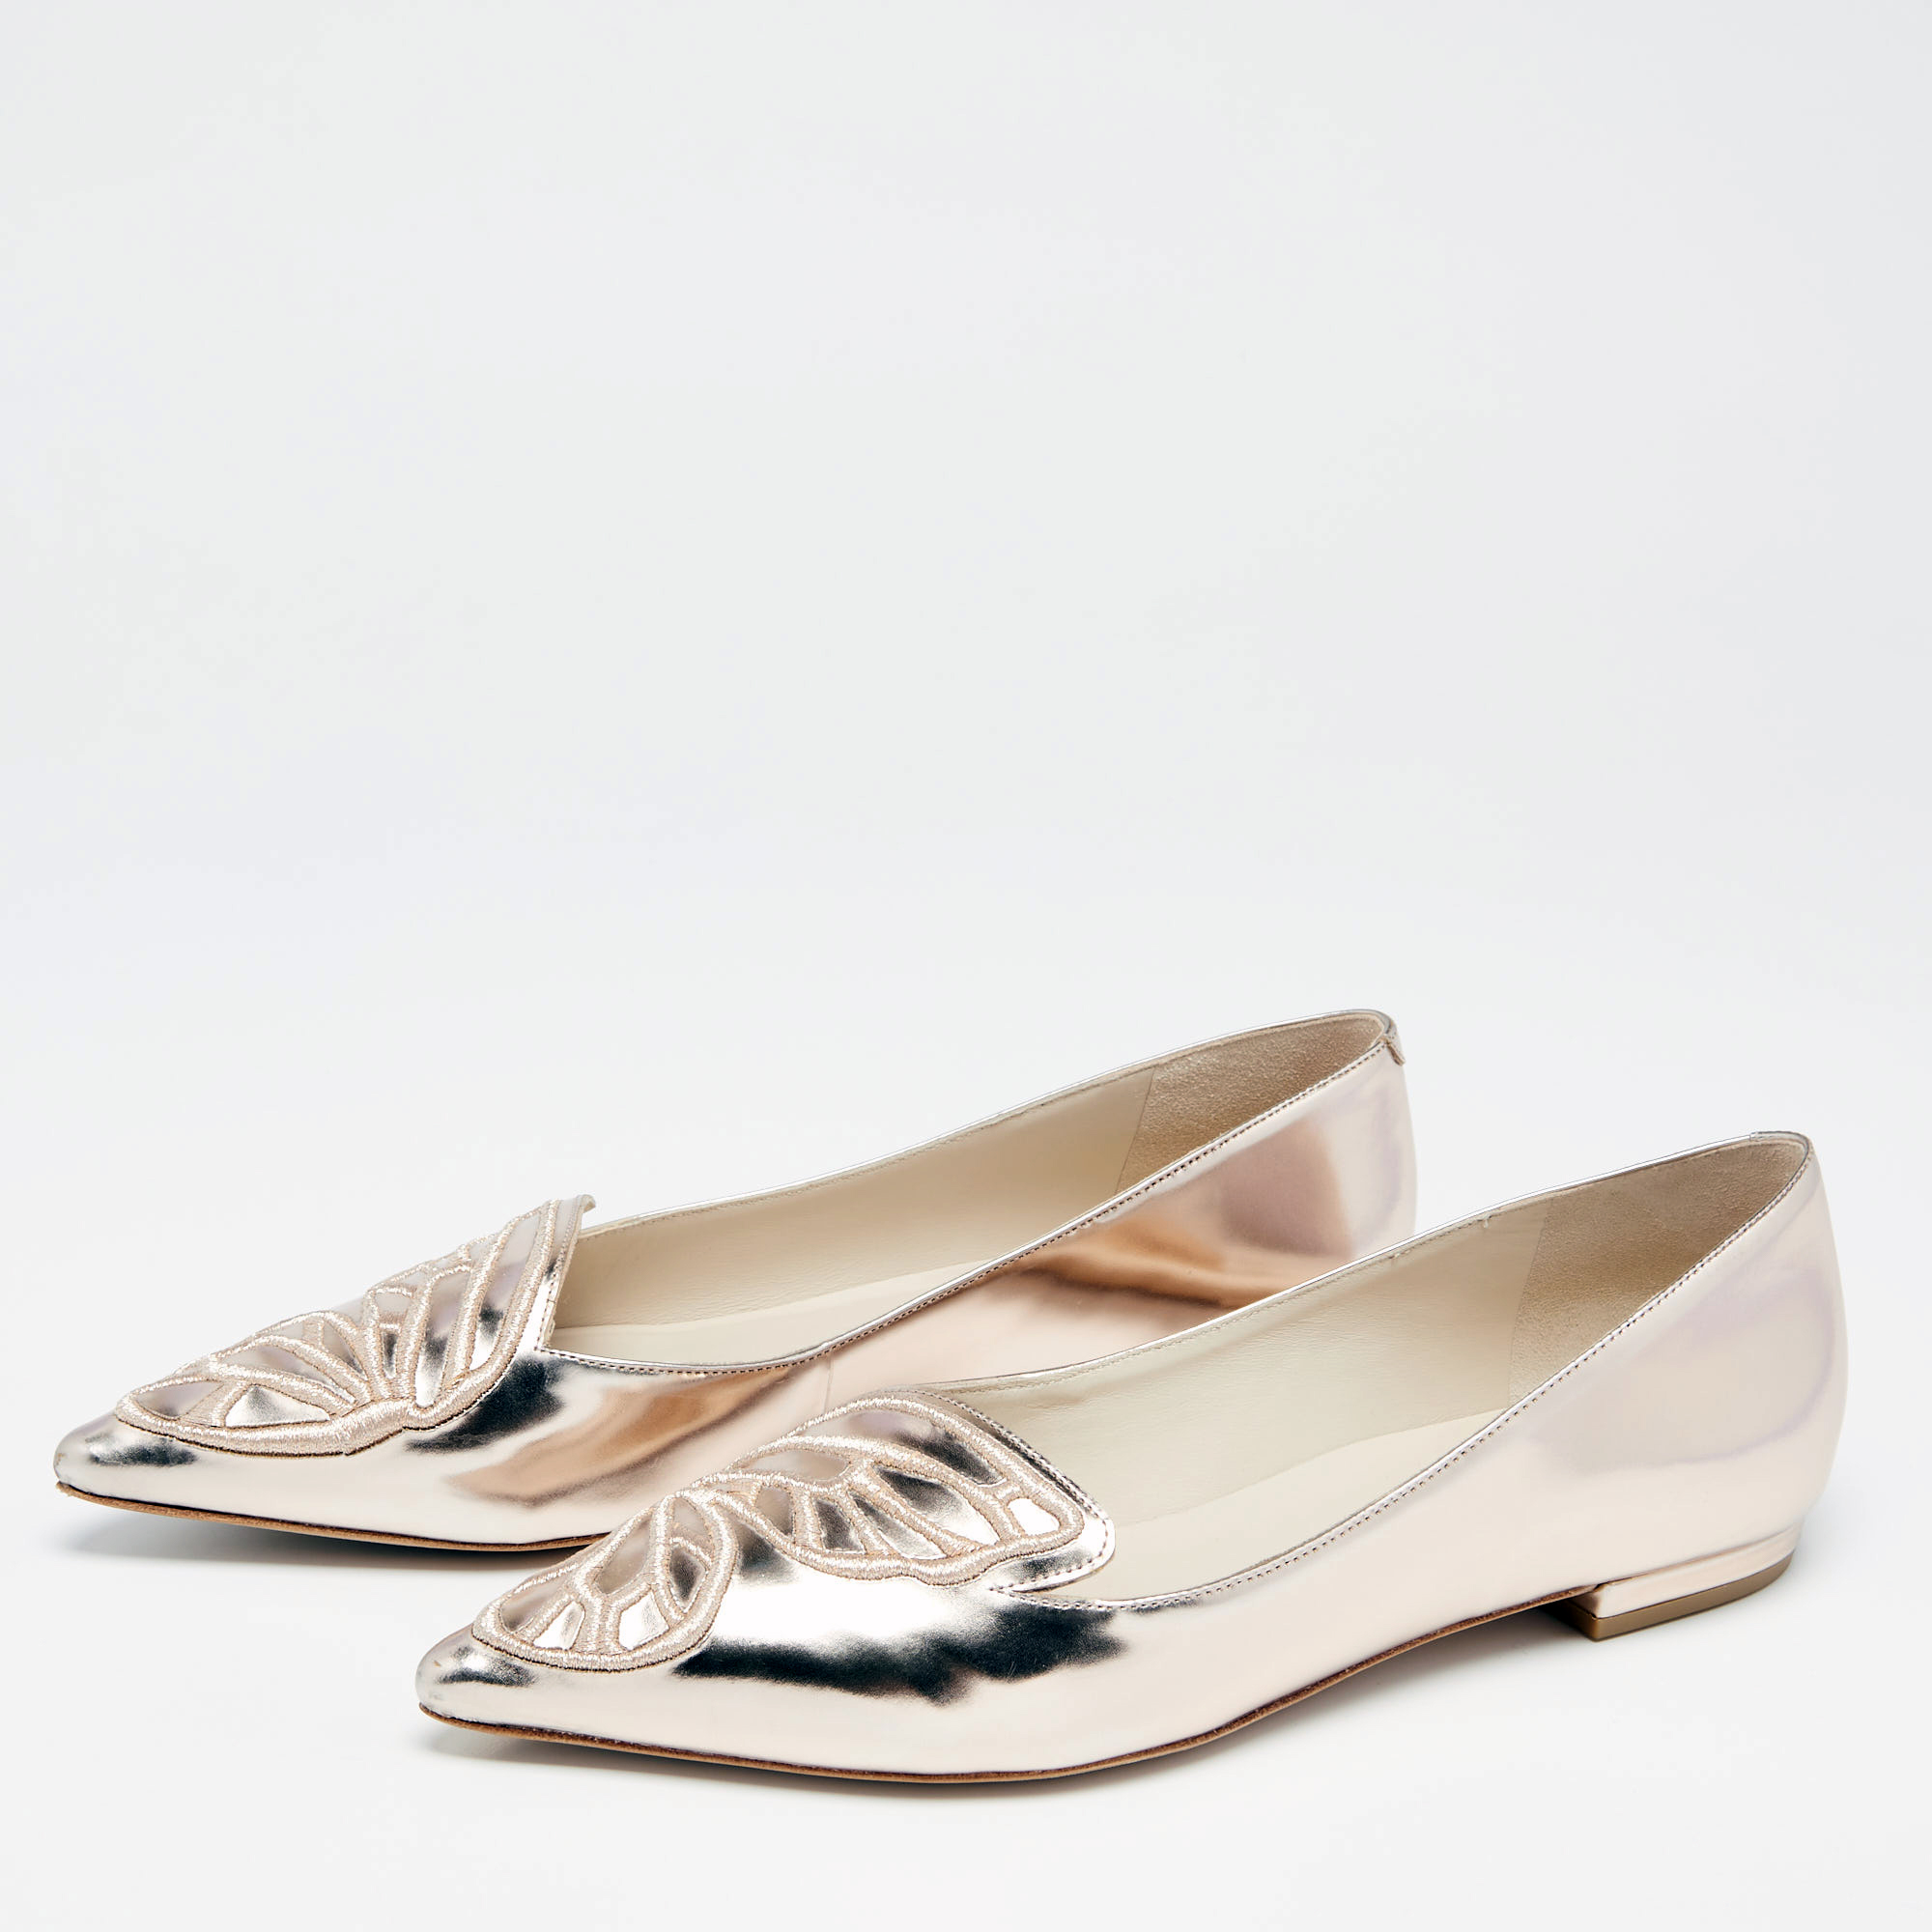 

Sophia Webster Metallic Rose Gold Leather Bibi Butterfly Pointed Toe Ballet Flats Size